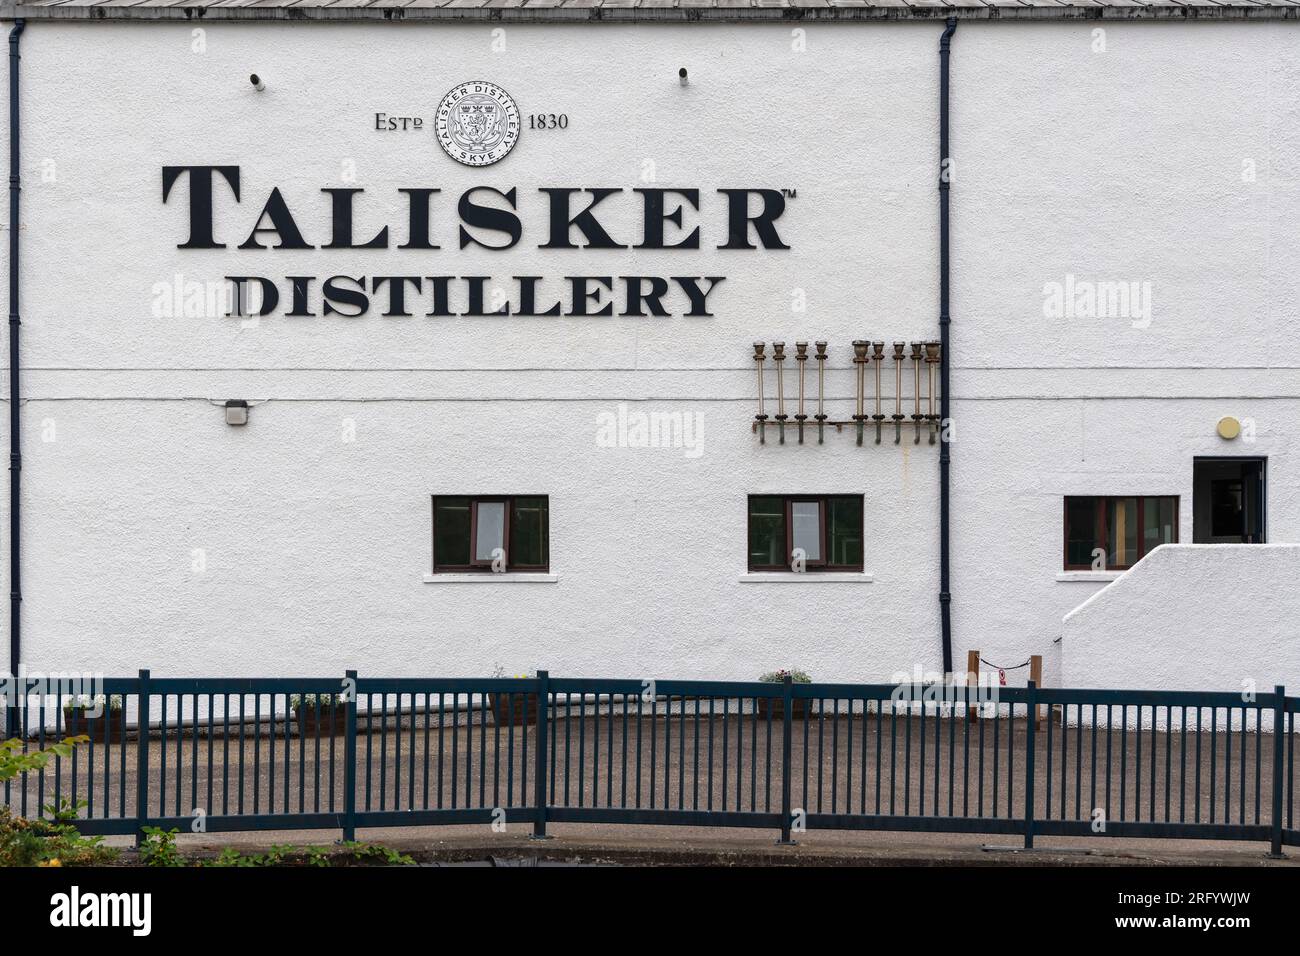 The Talisker Distillery Name on the Side of the Talisker Whisky Distillery & Visitor Centre at Carbost on the Isle of Skye Stock Photo